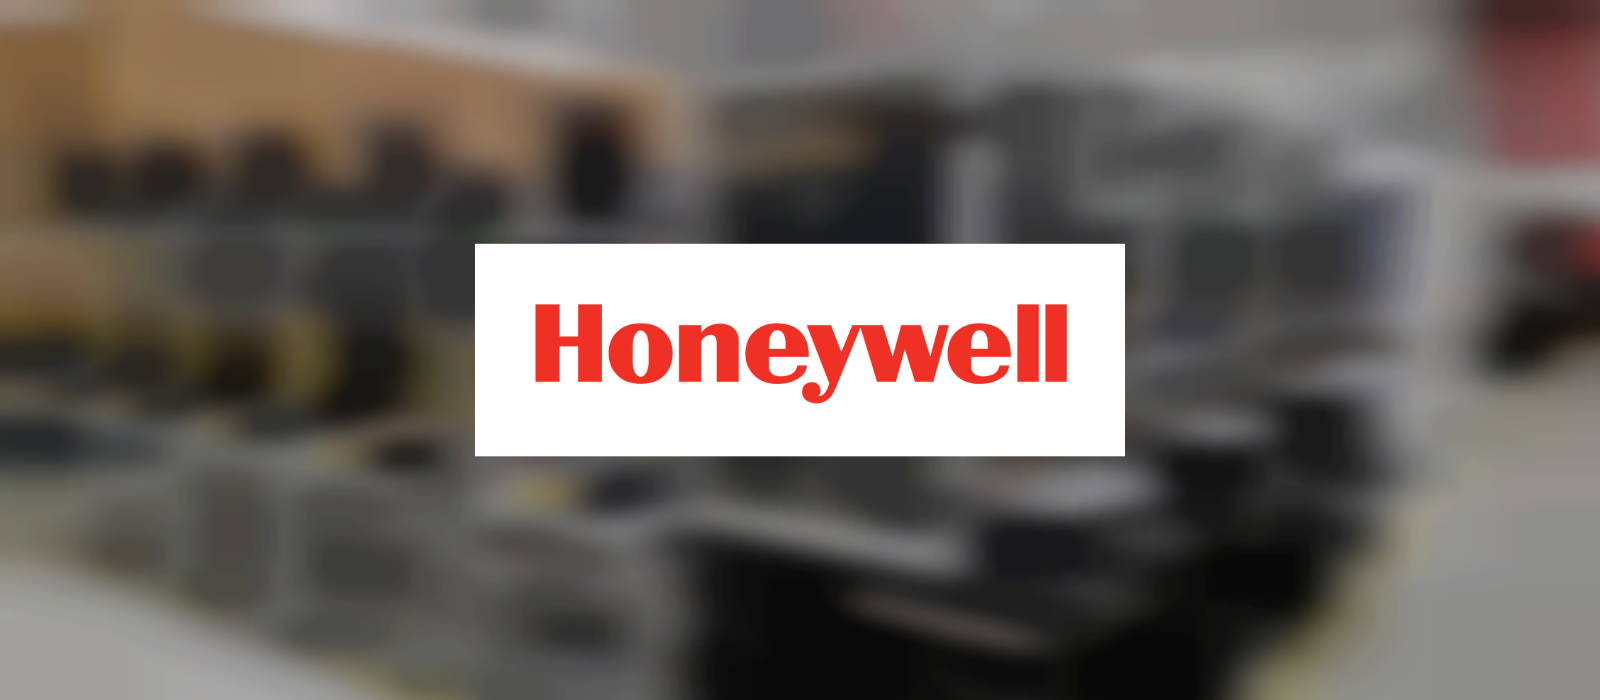 HGP & Branford to Conduct Remarkable Series of Webcast Auctions of Honeywell’s N95 Mask Production Facilities